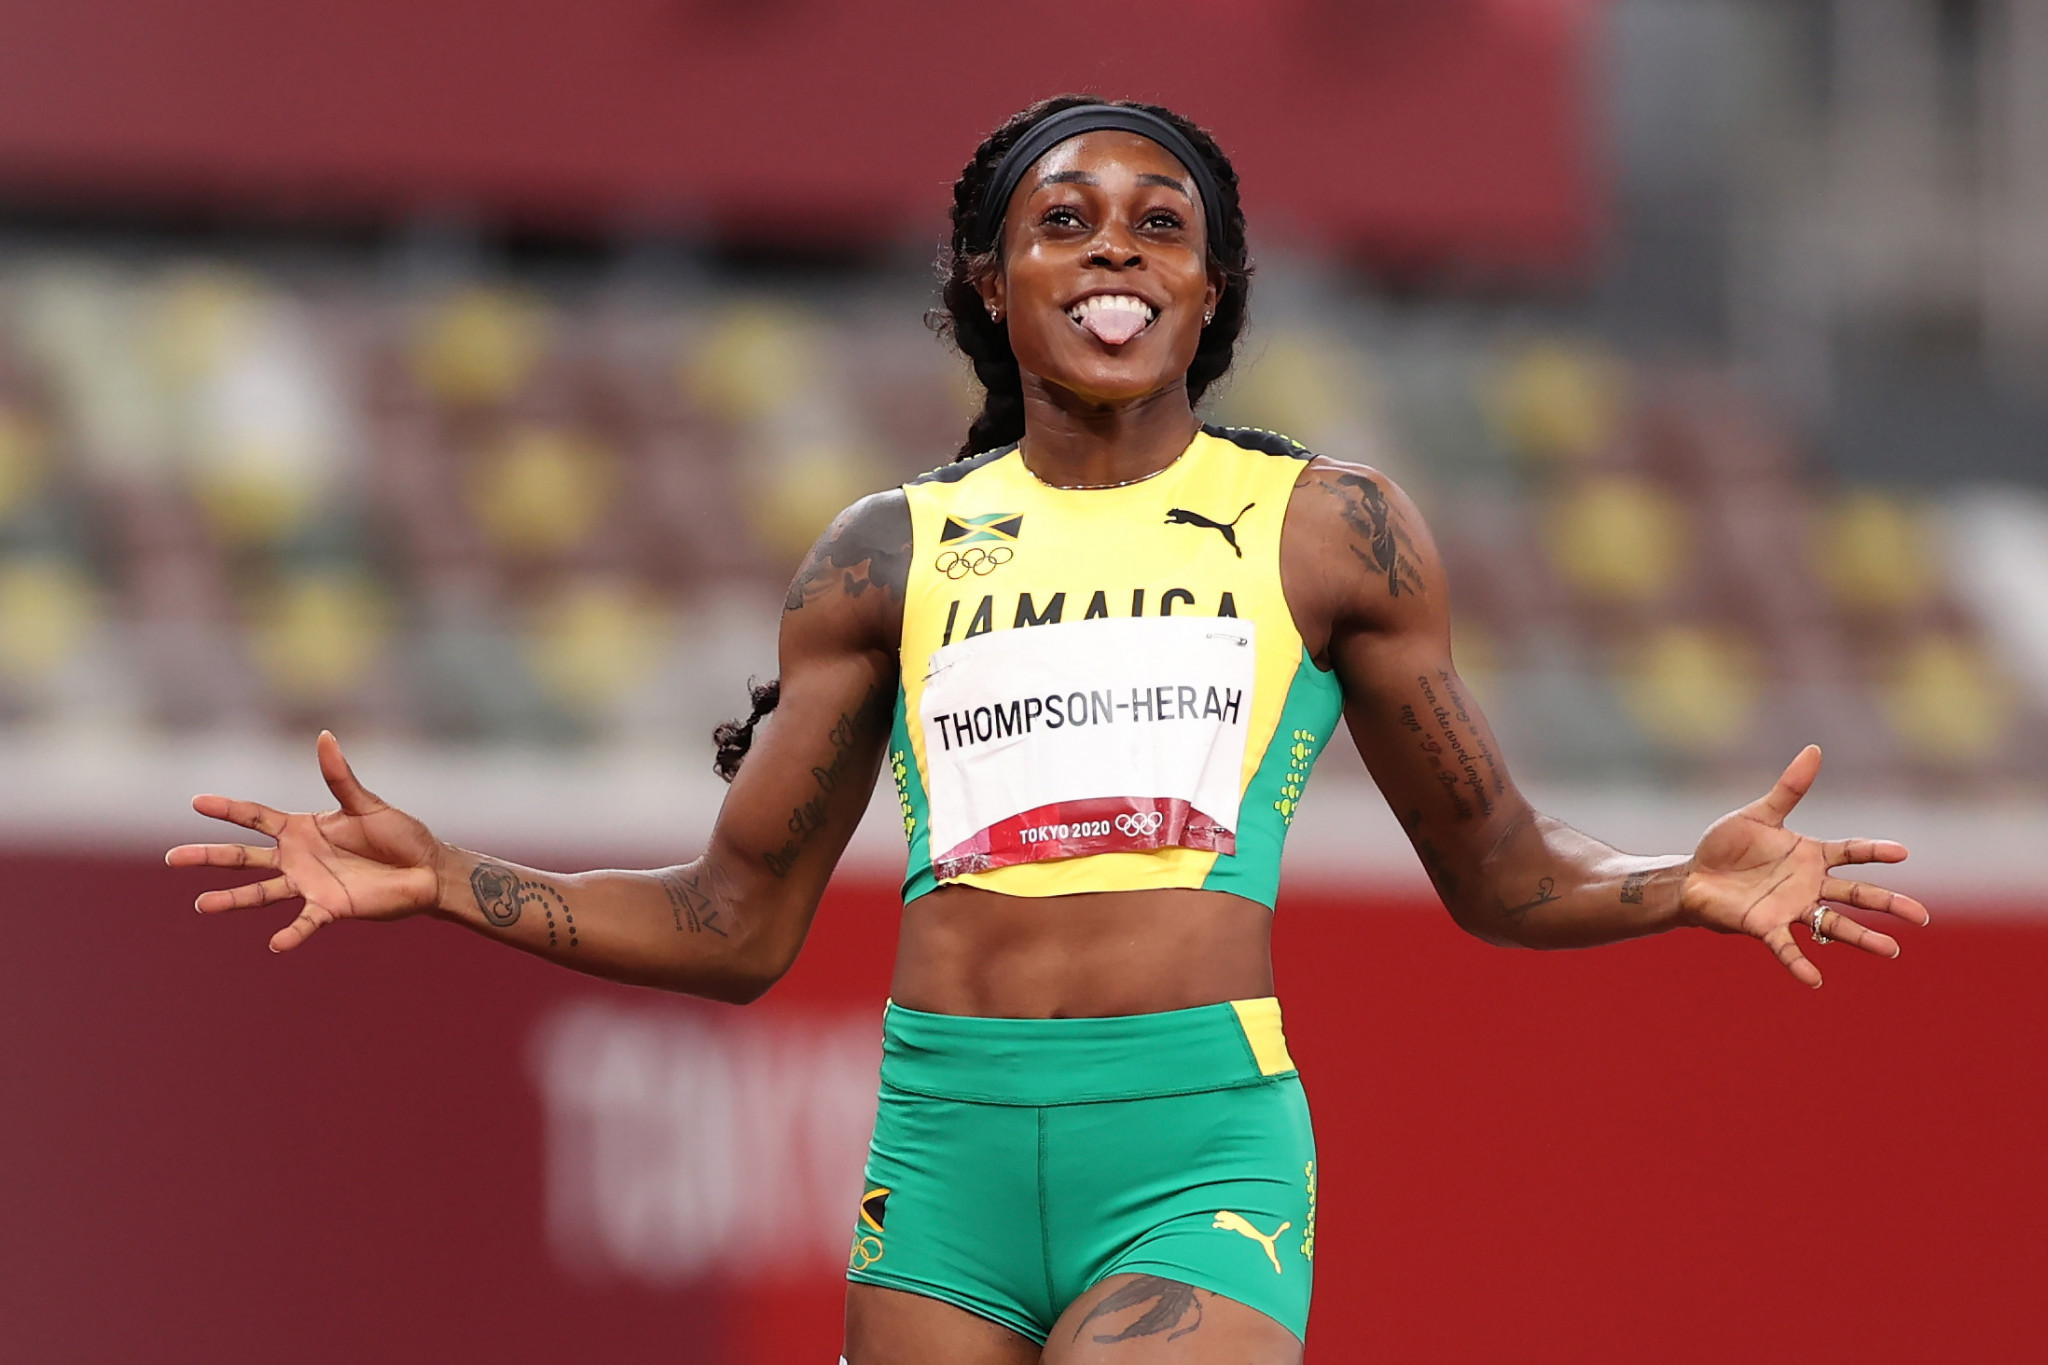 Elaine Thompson-Herah won three Olympic gold medals but was overlooked by ANOC for the best female athlete of the year at Tokyo 2020 ©Getty Images